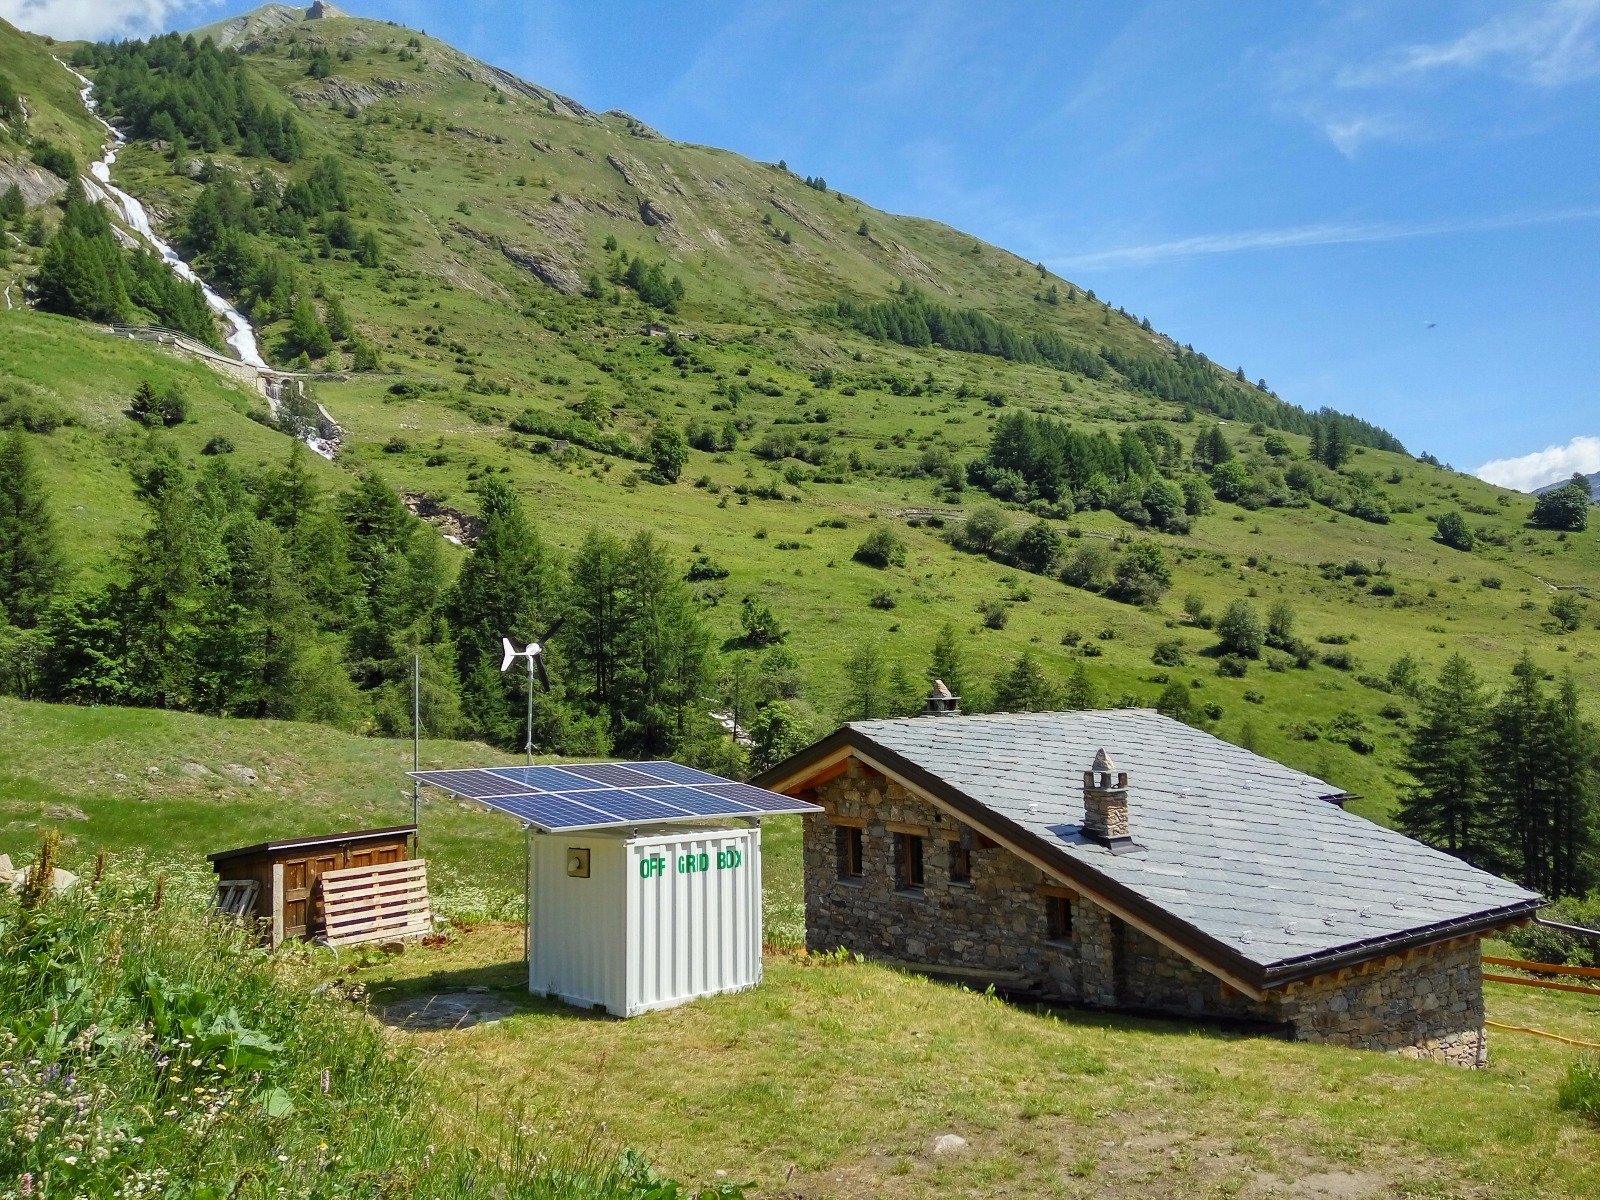 OffGridBox - Affordable Clean Water and Renewable Energy in Remote Areas